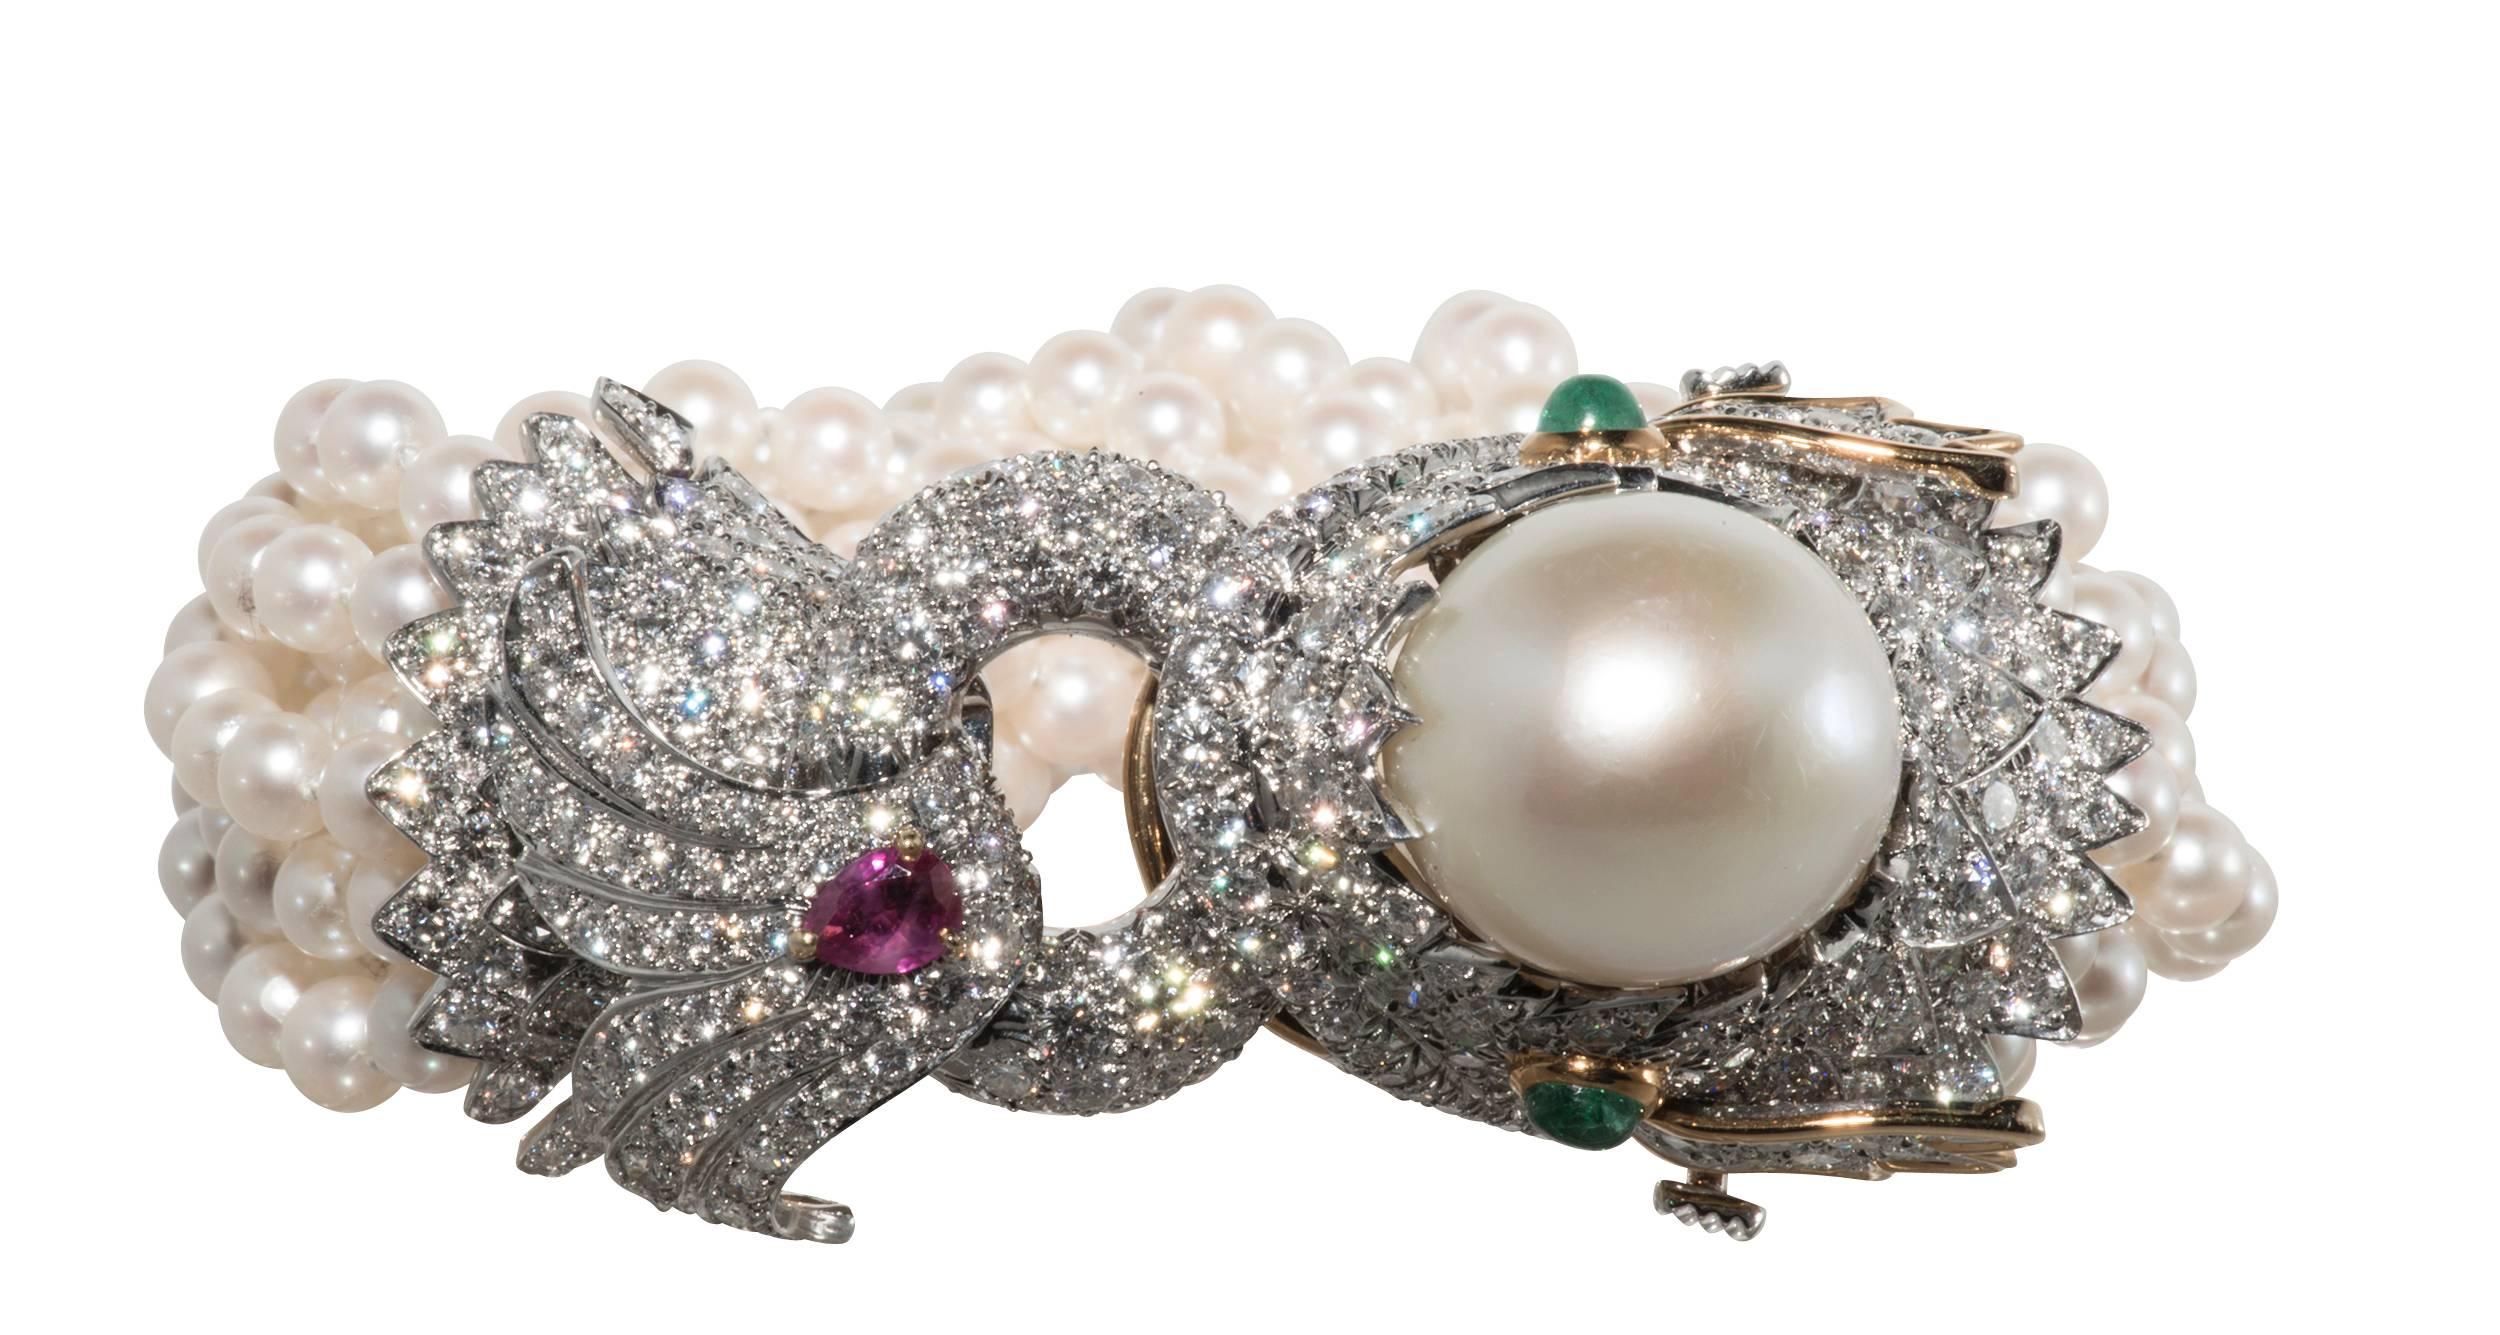 This is an exquisite David Webb 'Dolphin' bracelet containing 11.91ct of diamonds, pear shaped ruby weighing .57cts, 2 cabochon emeralds weighing .66cts. and 1 South Sea pearl and12 strands of 5-51/2 mm pearls all set in 18k yellow gold and platinum.